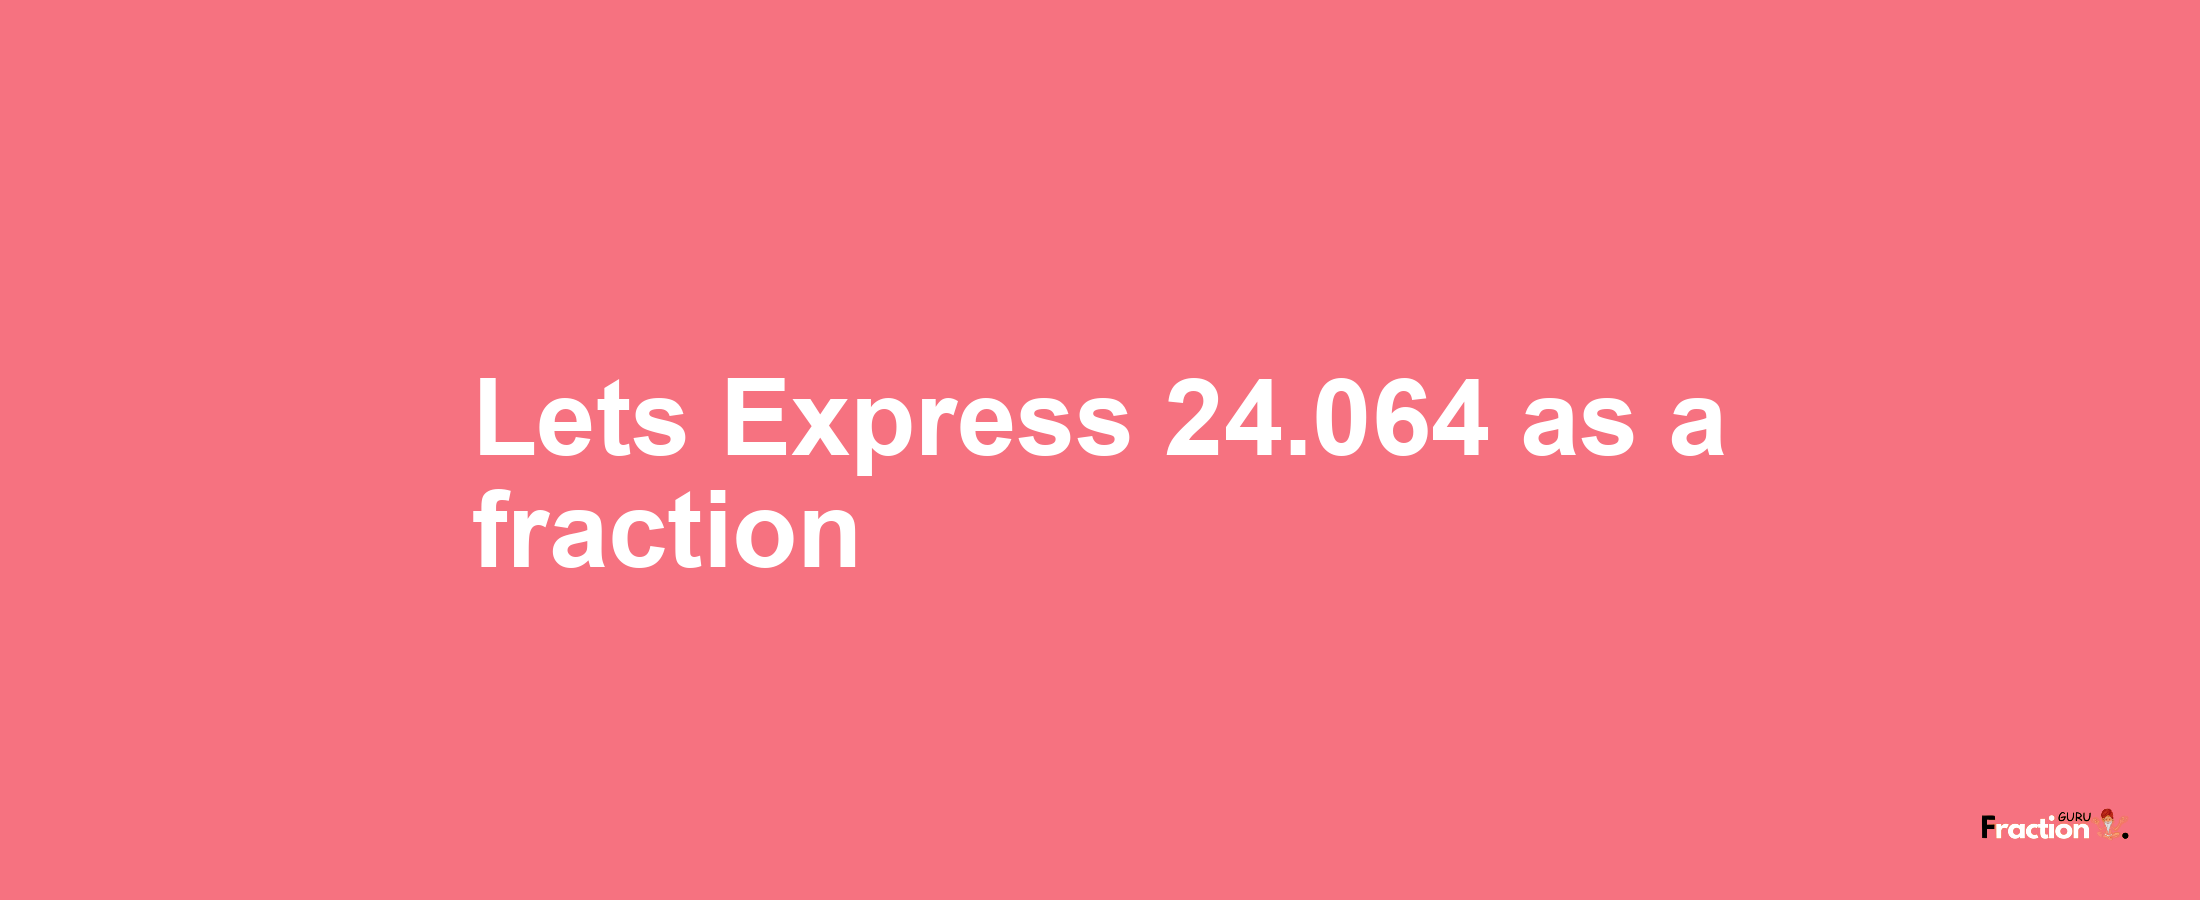 Lets Express 24.064 as afraction